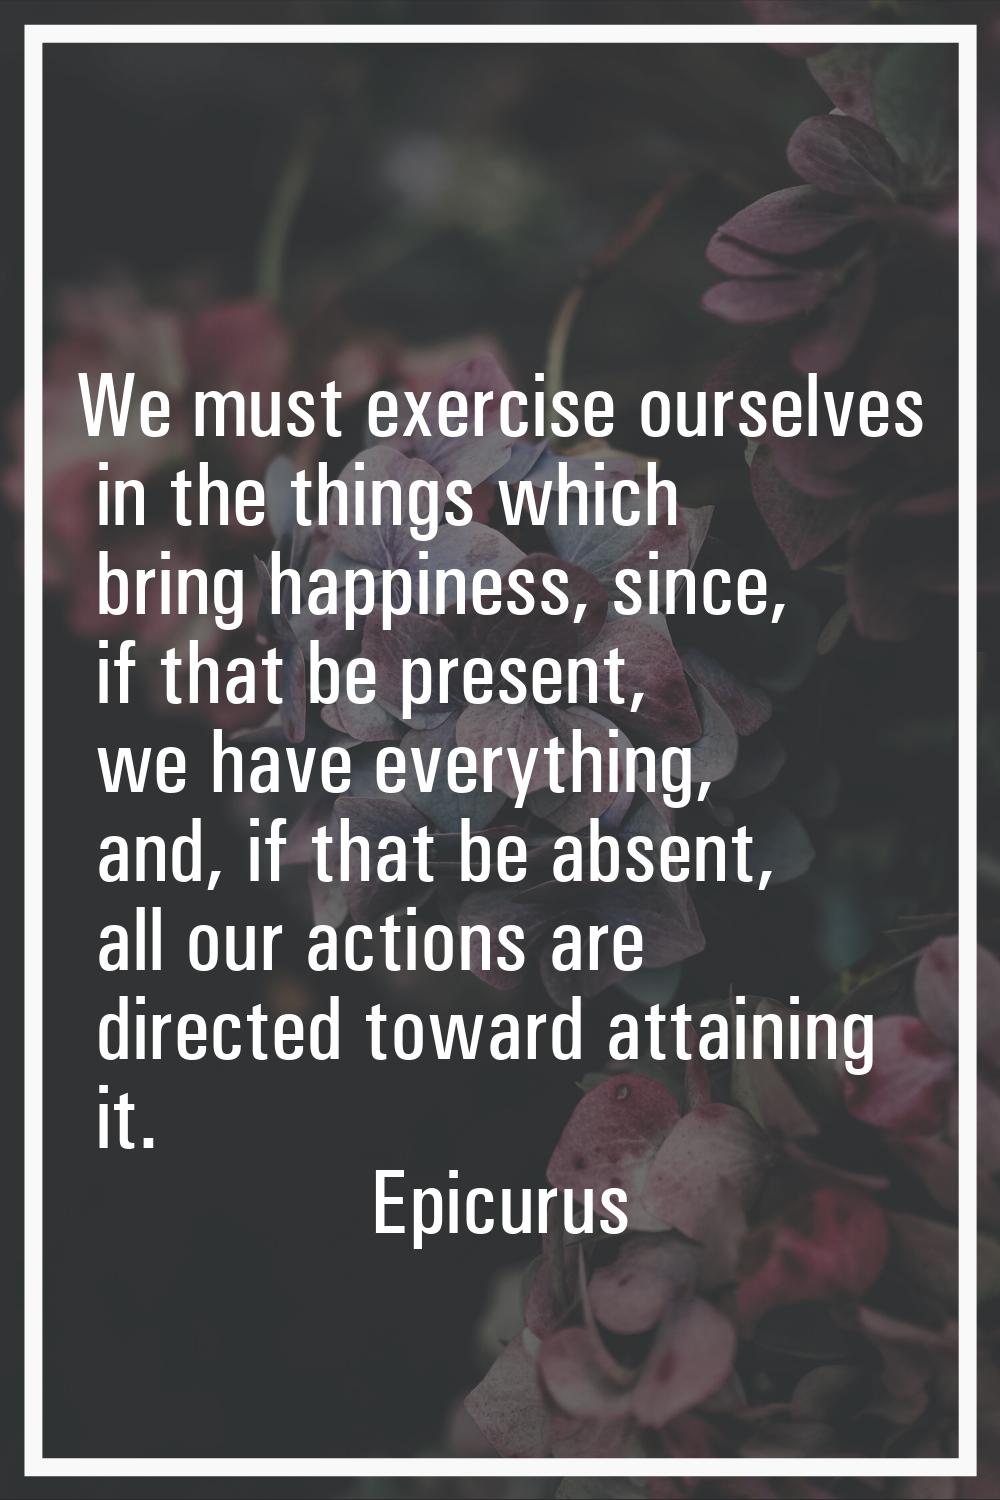 We must exercise ourselves in the things which bring happiness, since, if that be present, we have 